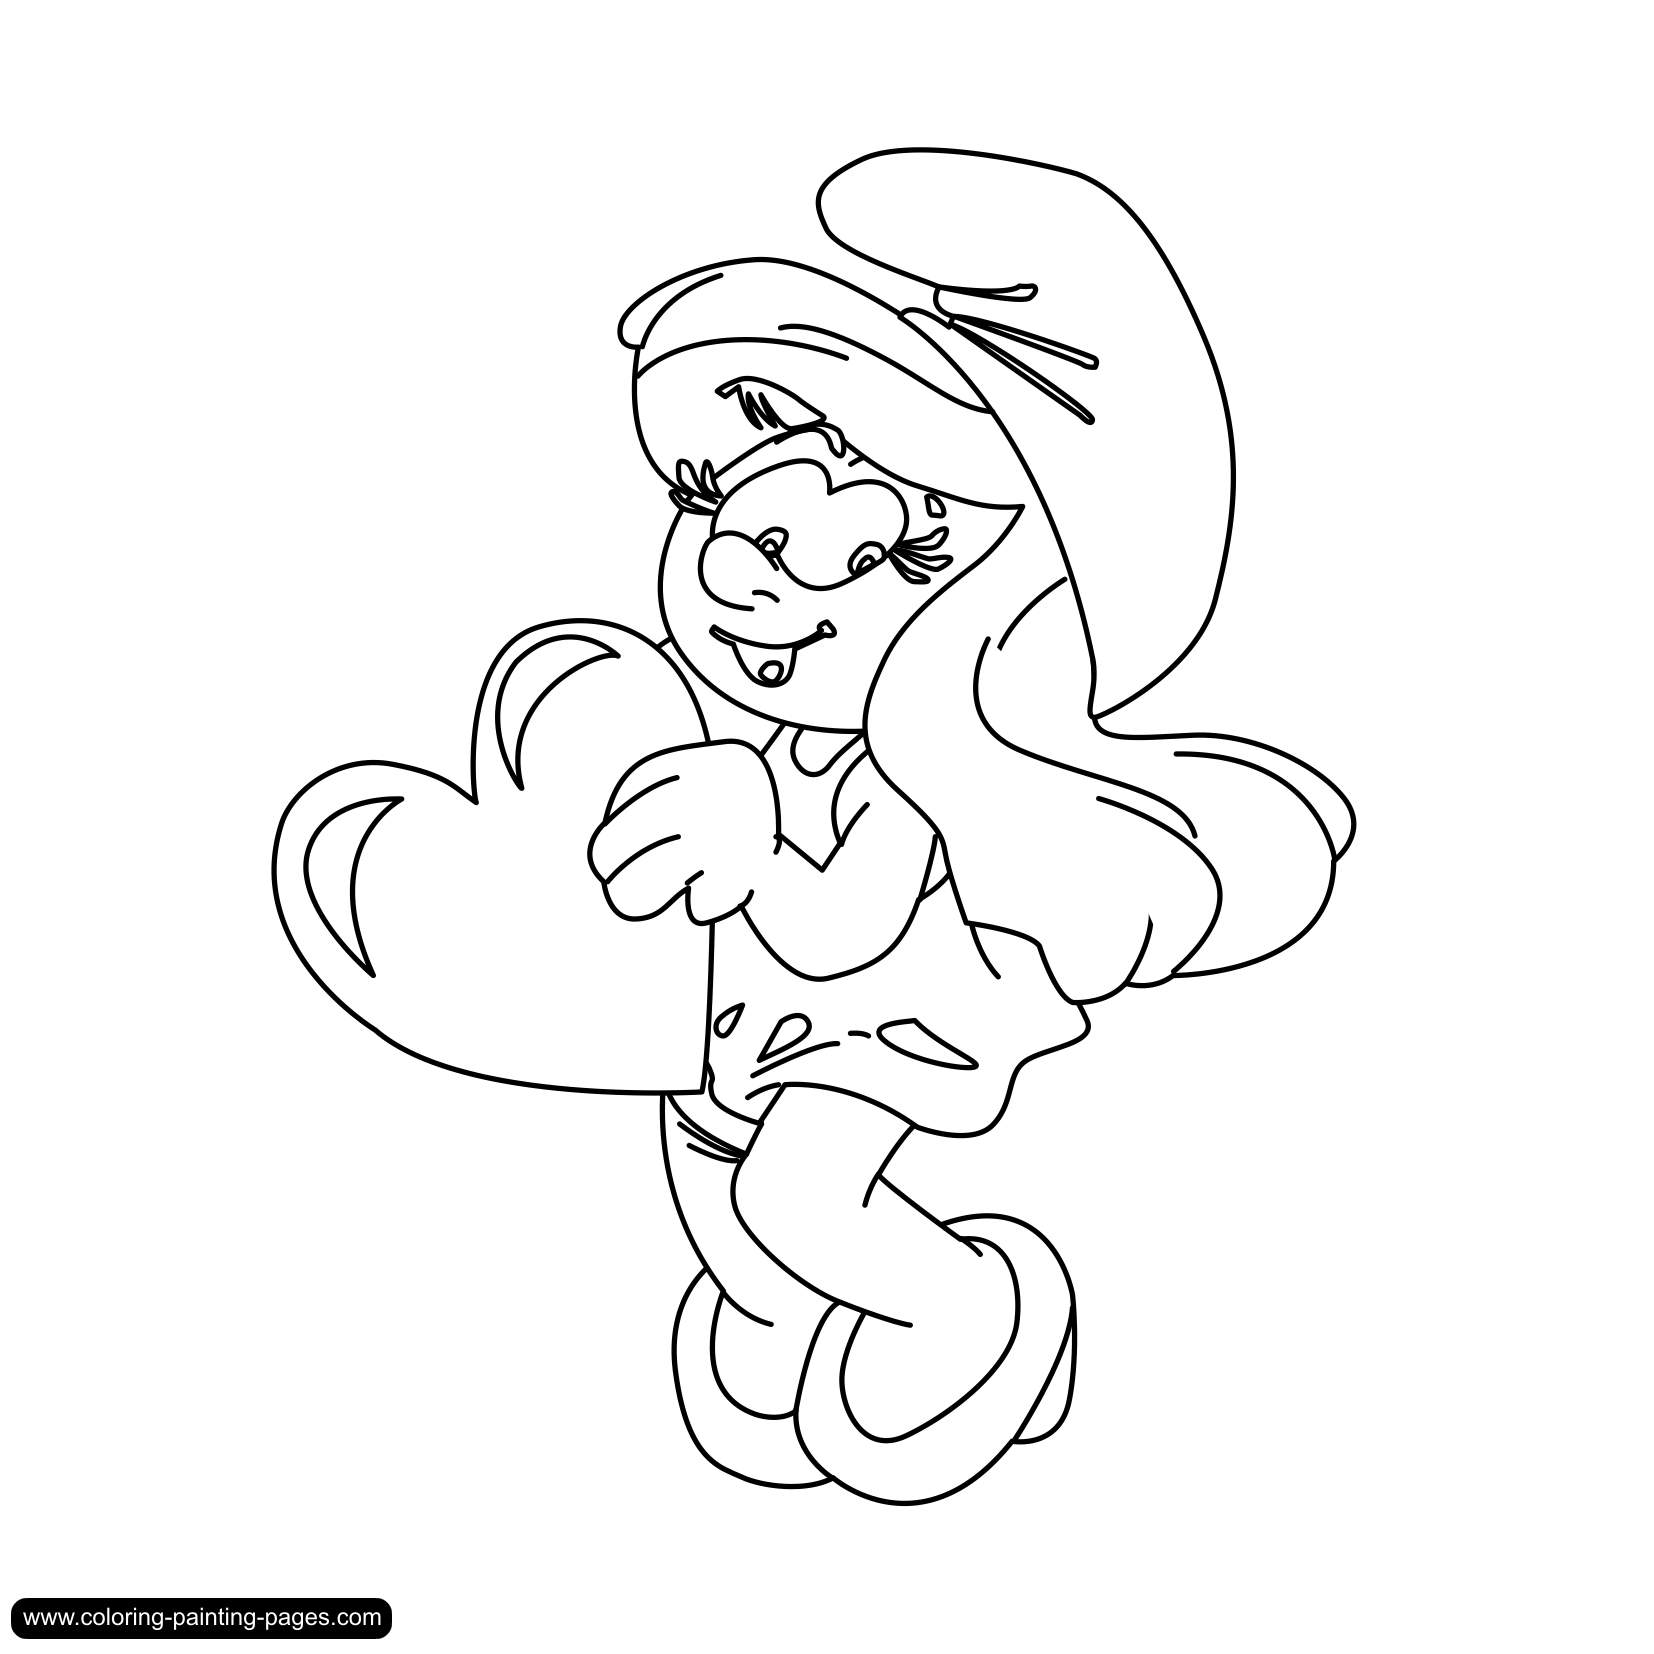 hackus smurf coloring pages - photo #26